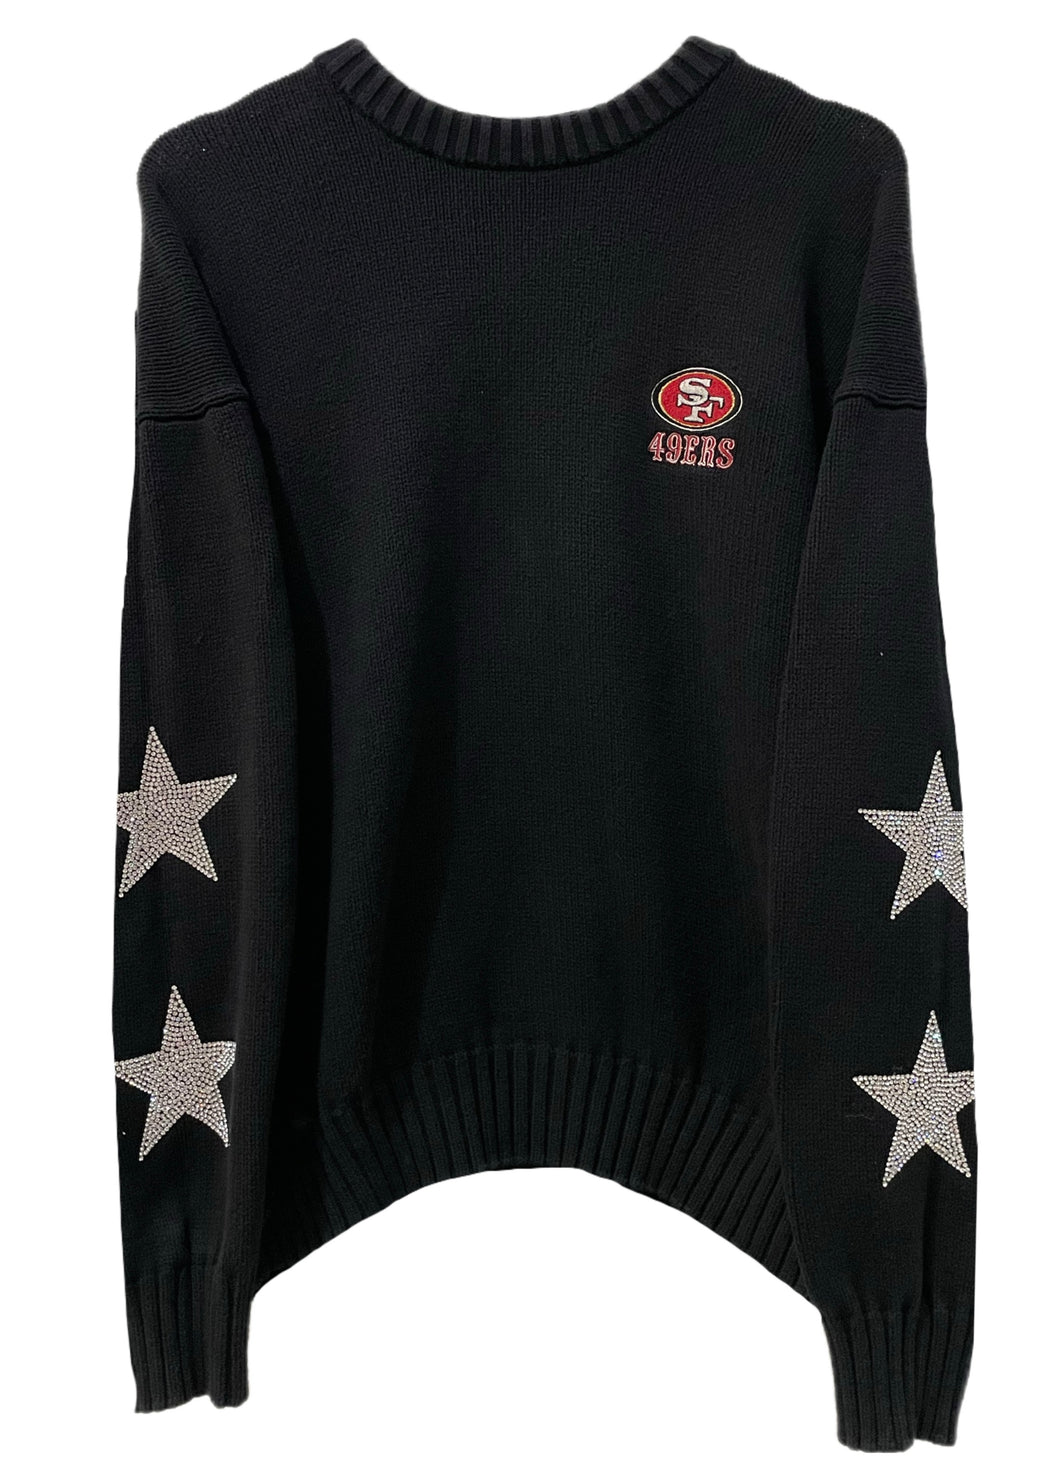 San Francisco 49ers, Football One of a KIND Vintage “Rare Find” Knit Sweater with Crystal Star Design